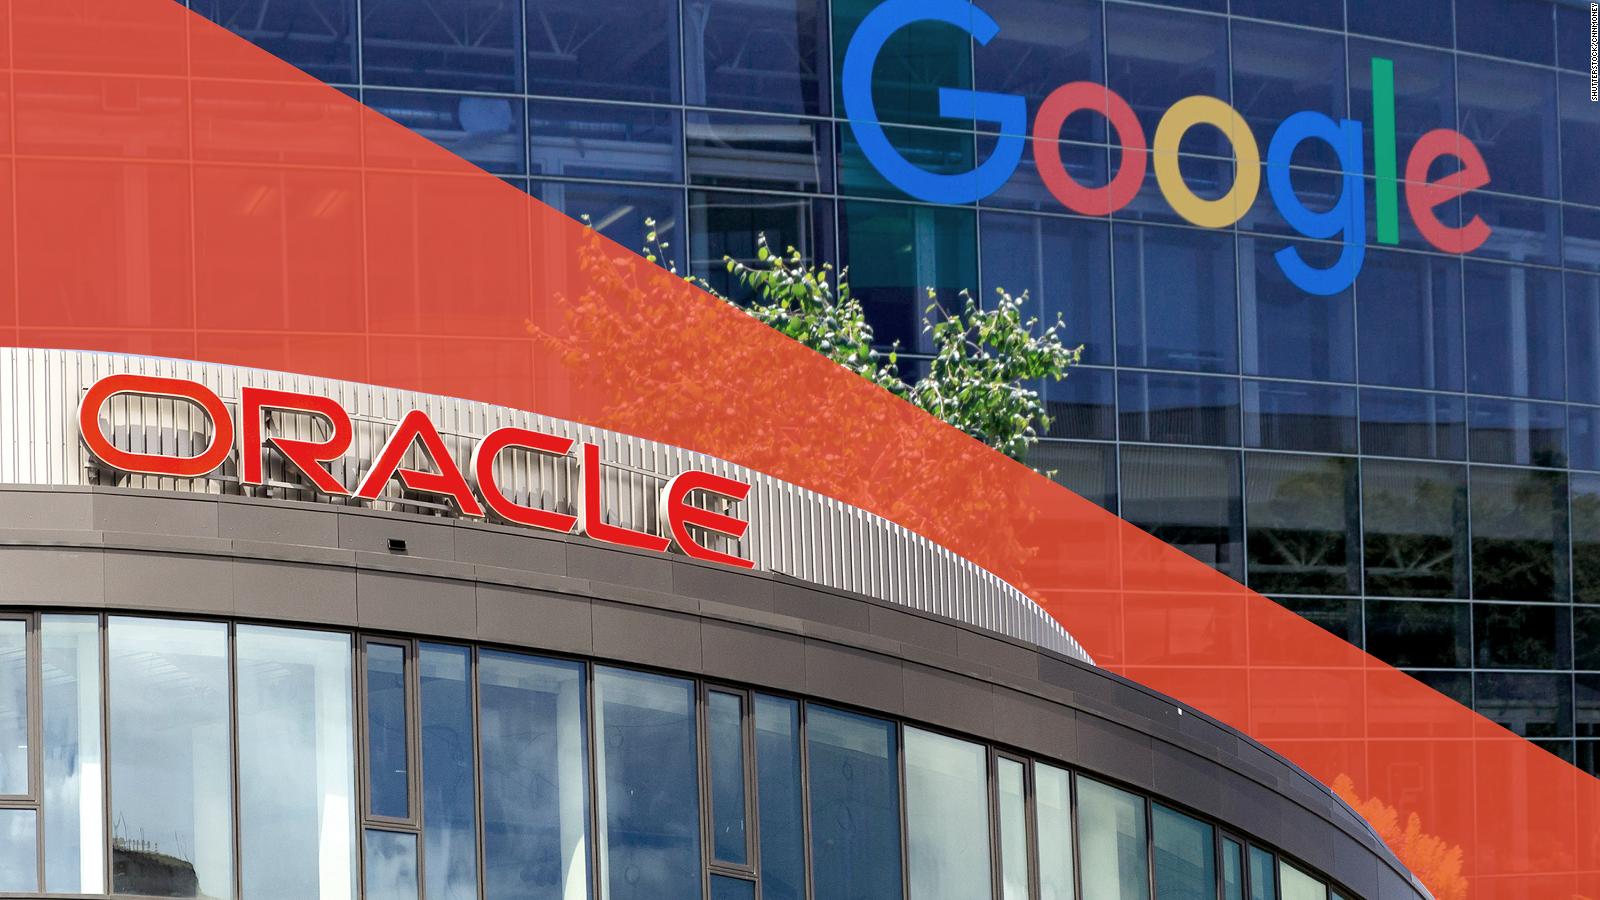 The Supreme Court of Justice of EE.UU.  Google Reason for Oracle Front |  Video